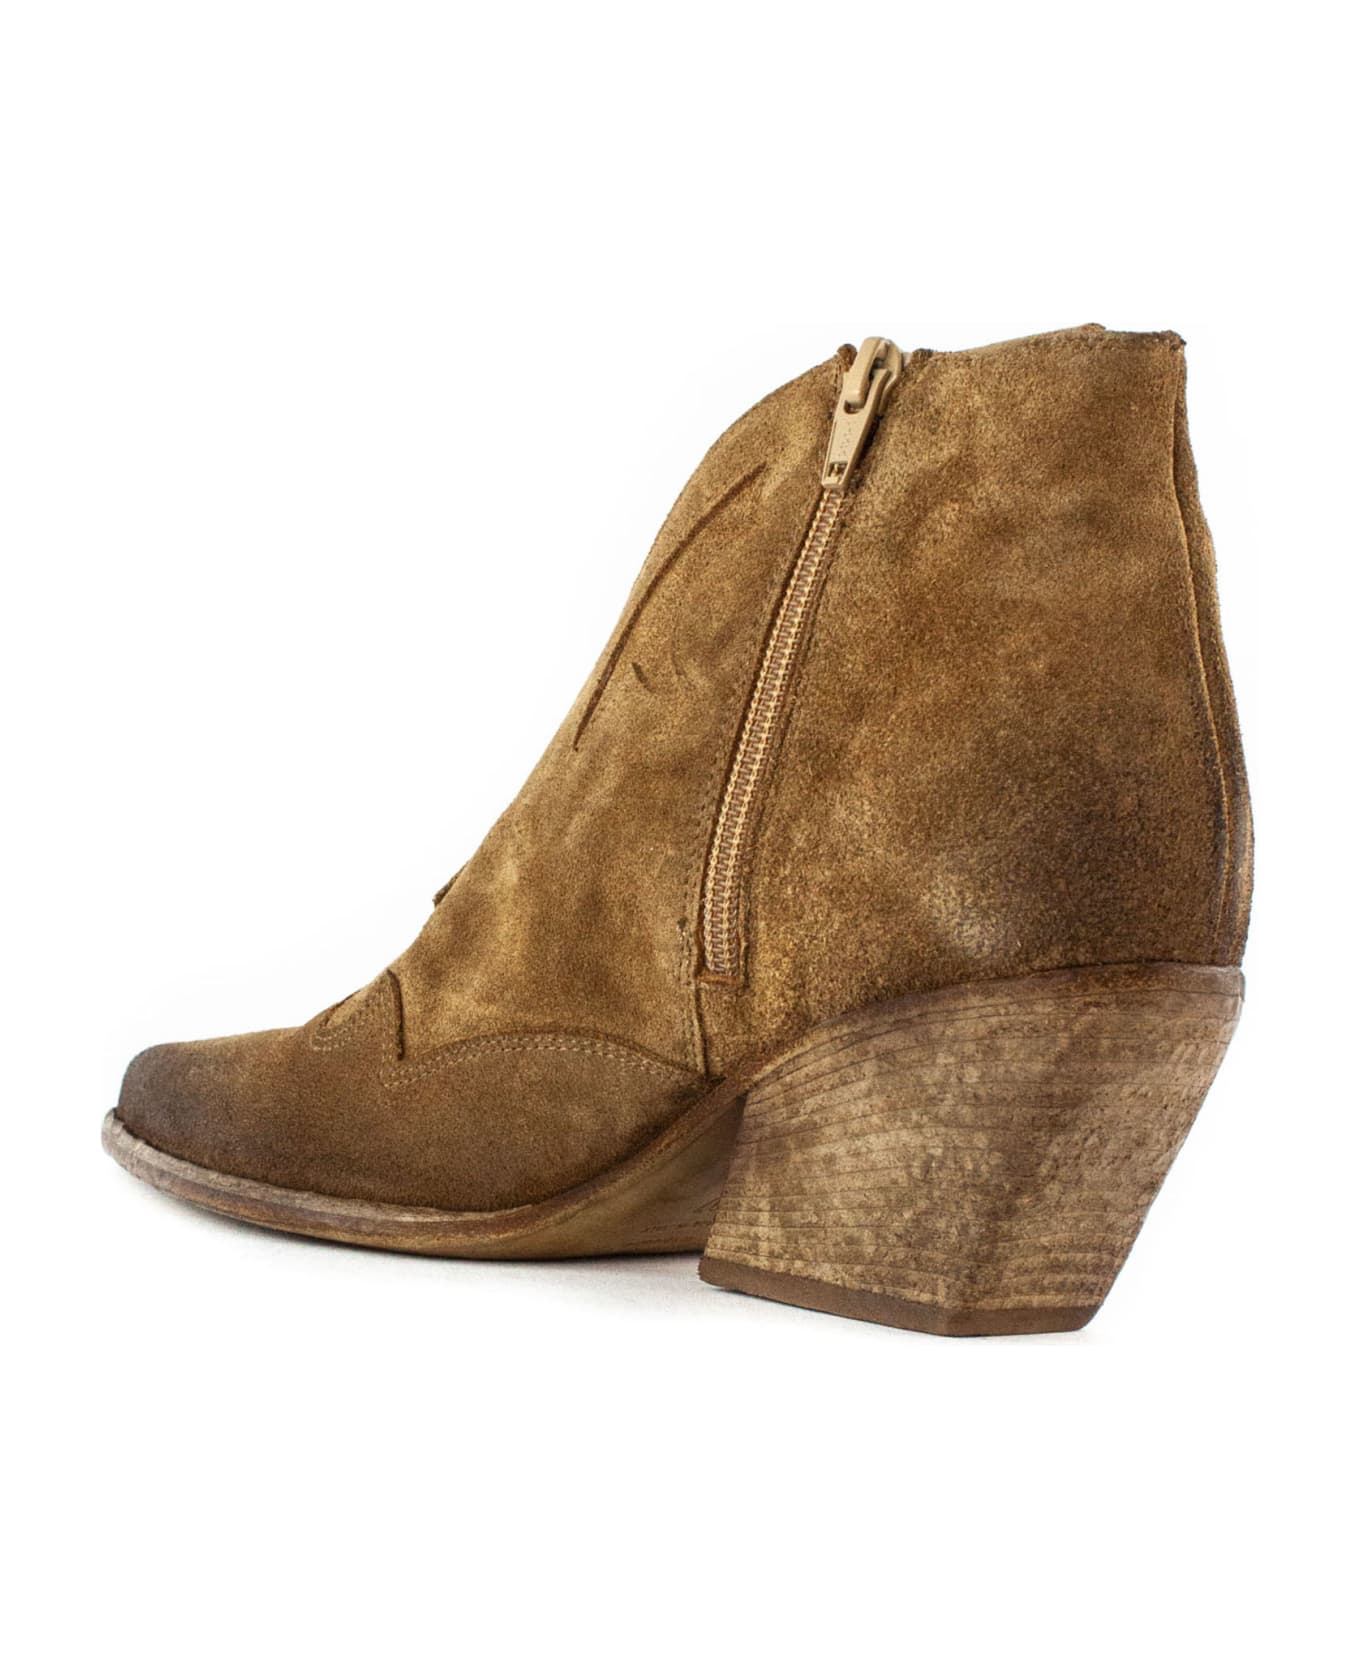 Elena Iachi Brown Suede Texan Ankle Boots - Brown ブーツ